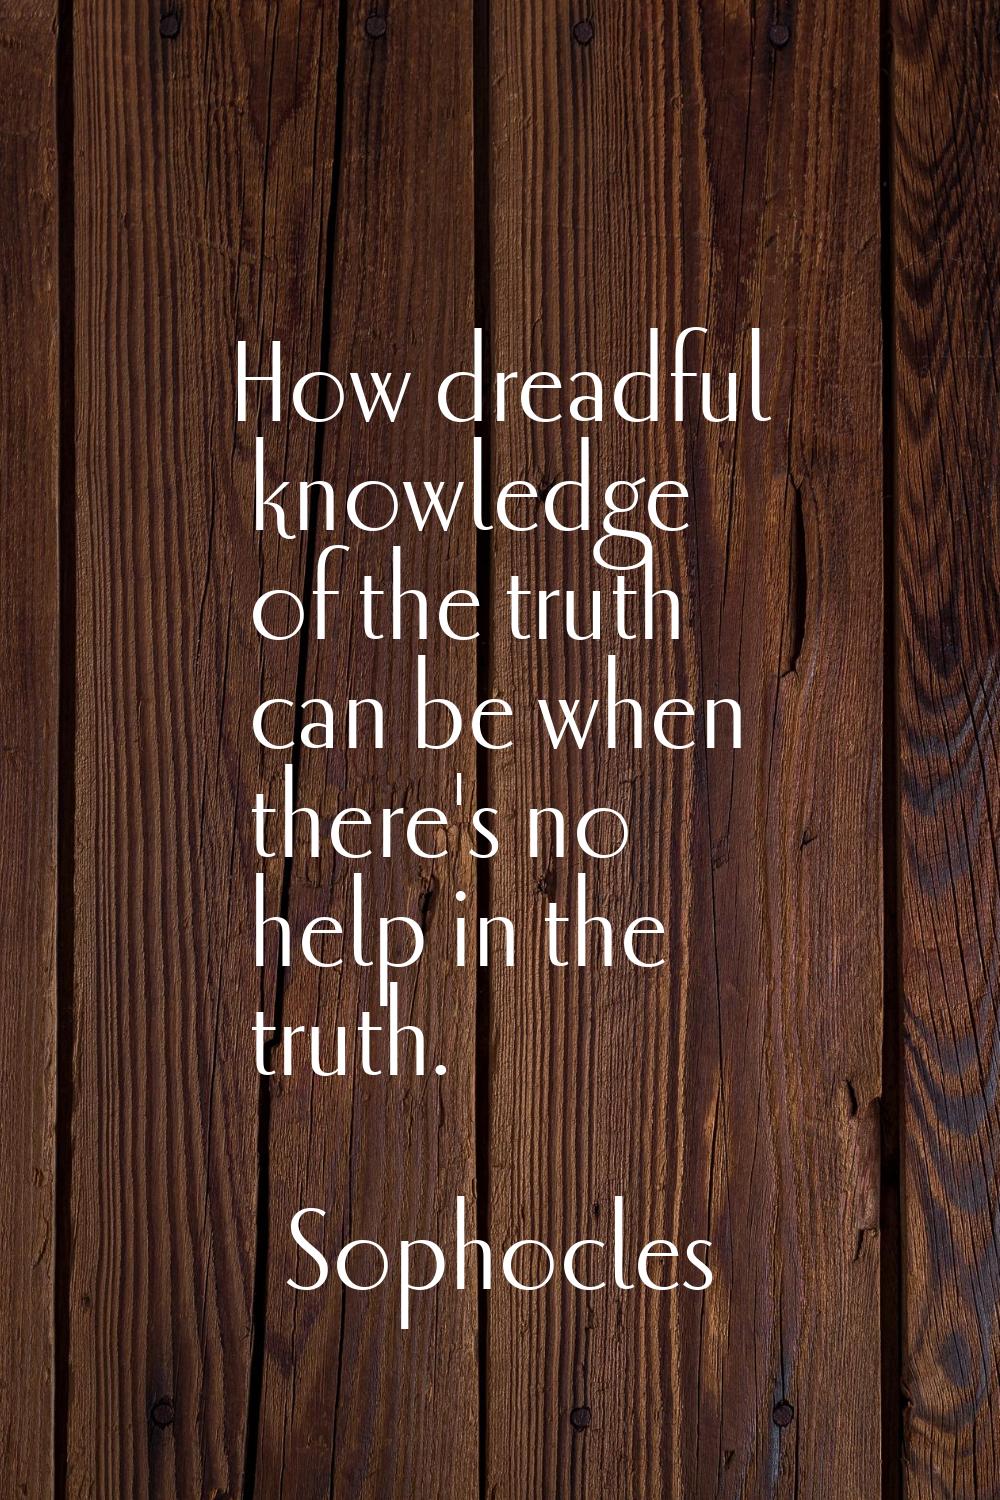 How dreadful knowledge of the truth can be when there's no help in the truth.